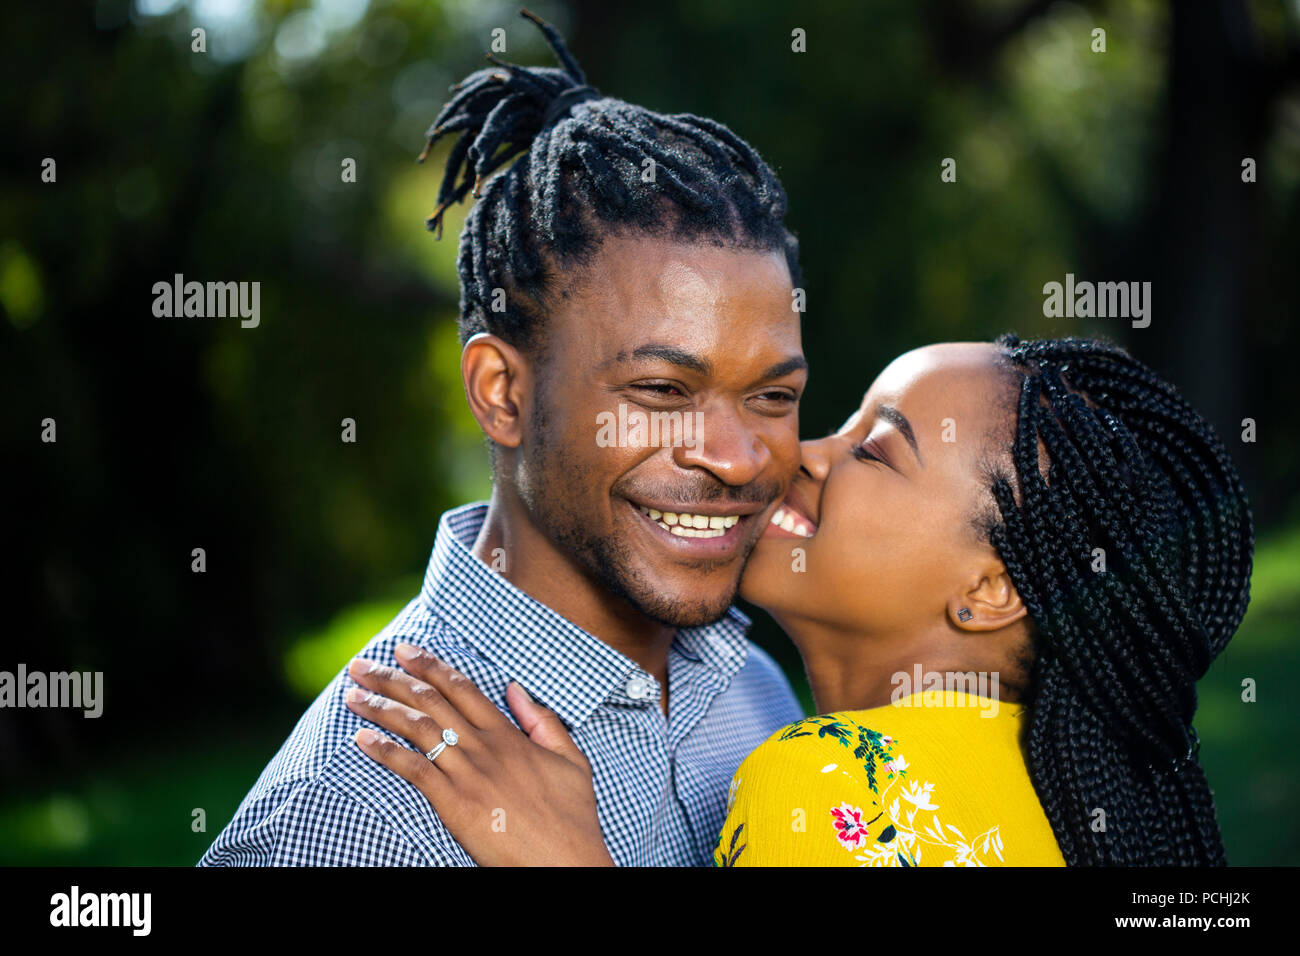 African woman kissing African man on cheek Banque D'Images